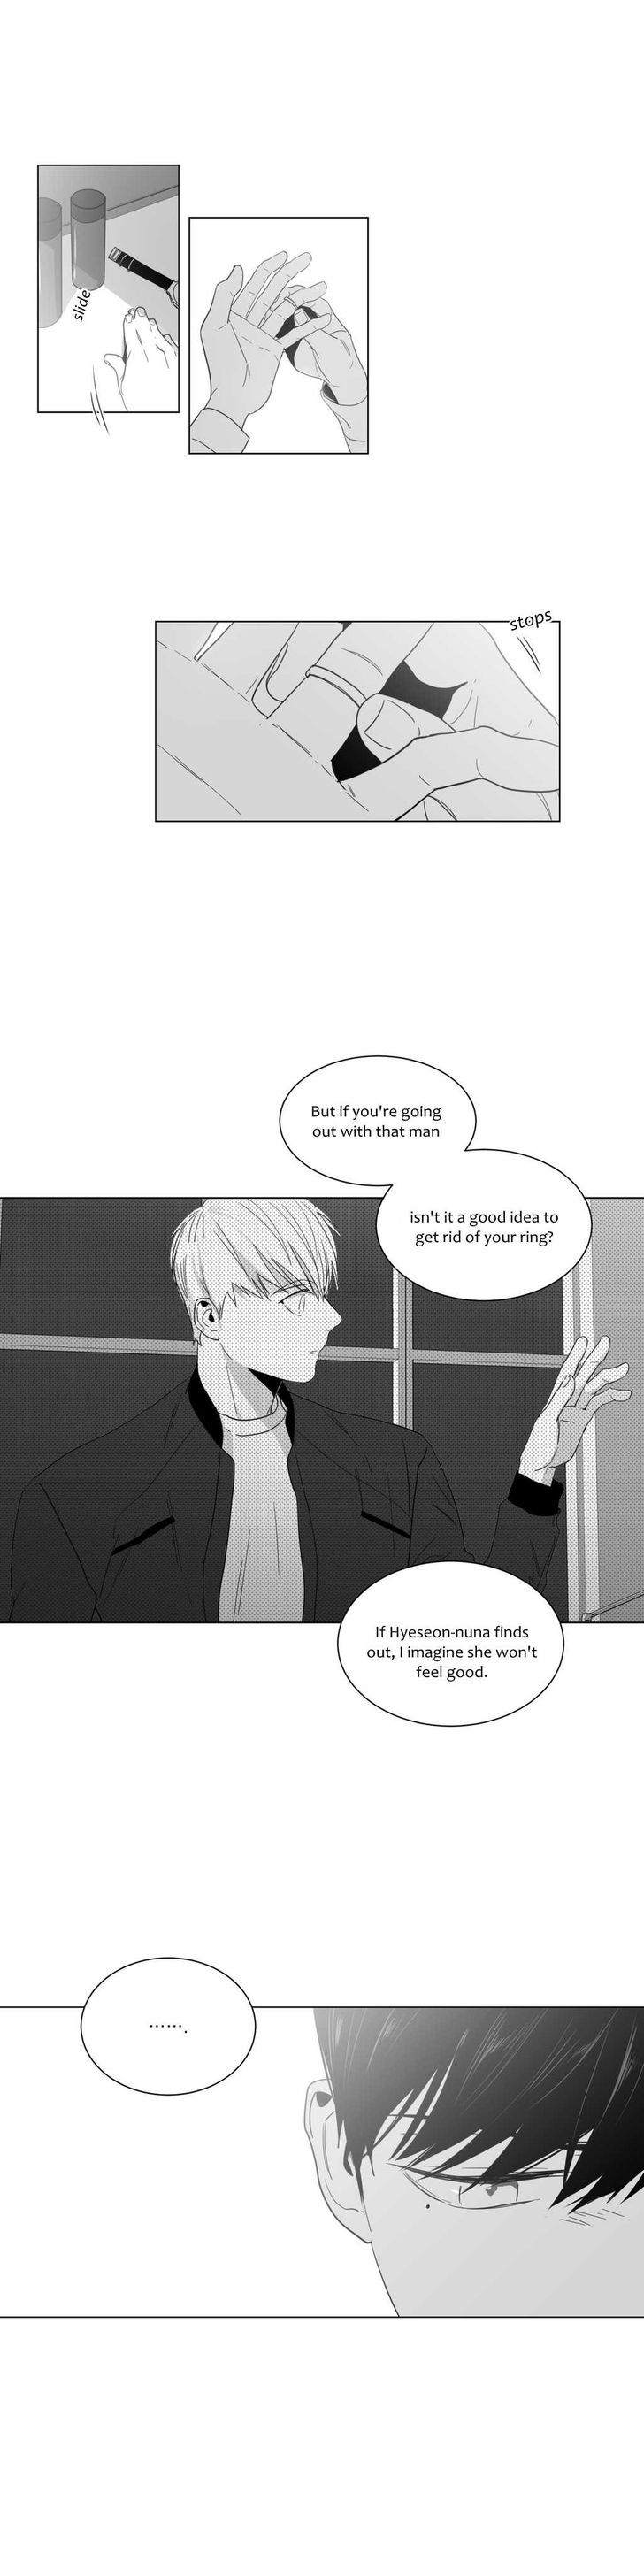 Lover Boy (Lezhin) Chapter 012 page 5